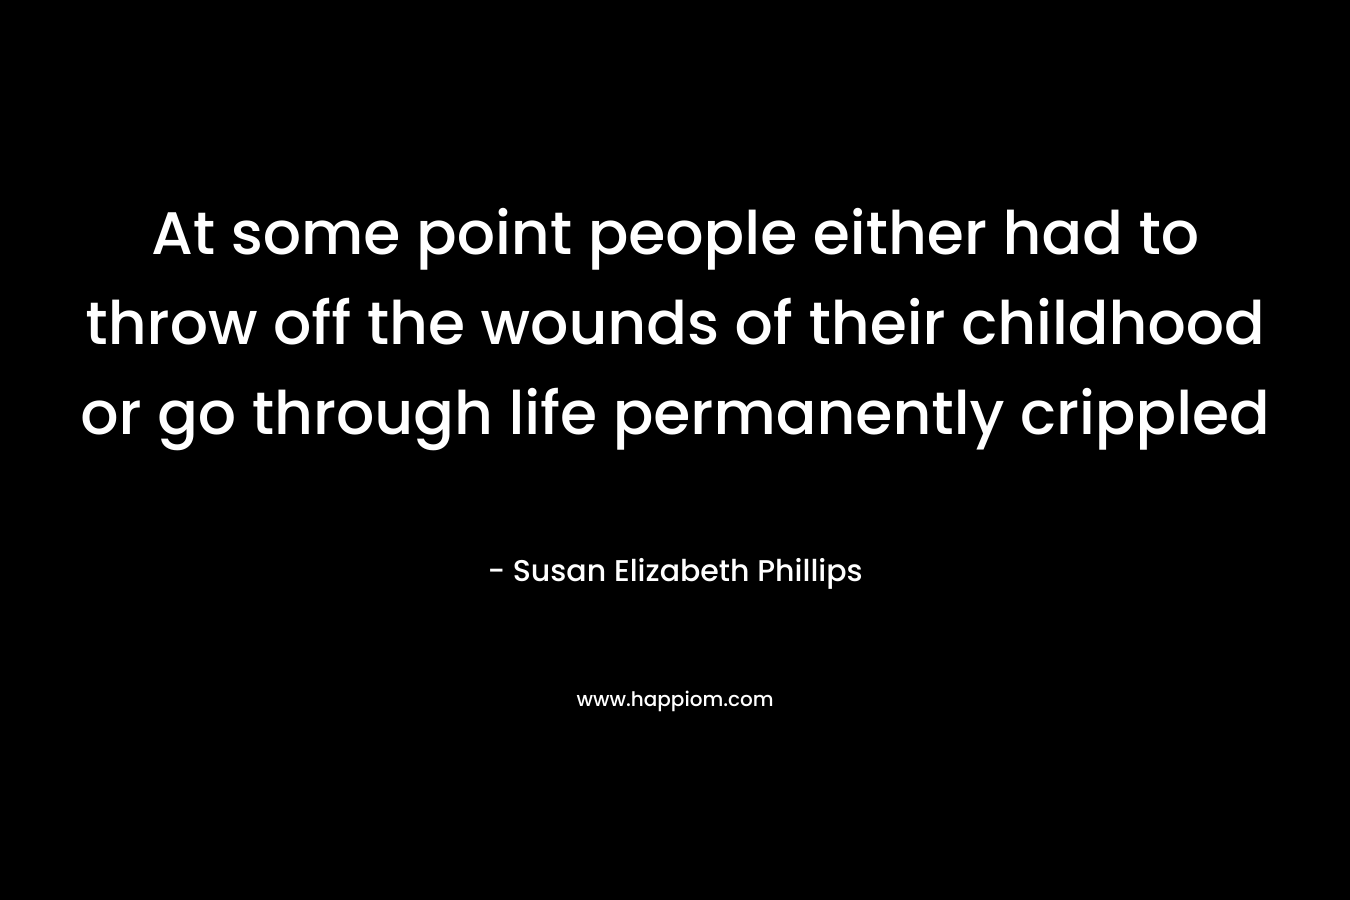 At some point people either had to throw off the wounds of their childhood or go through life permanently crippled